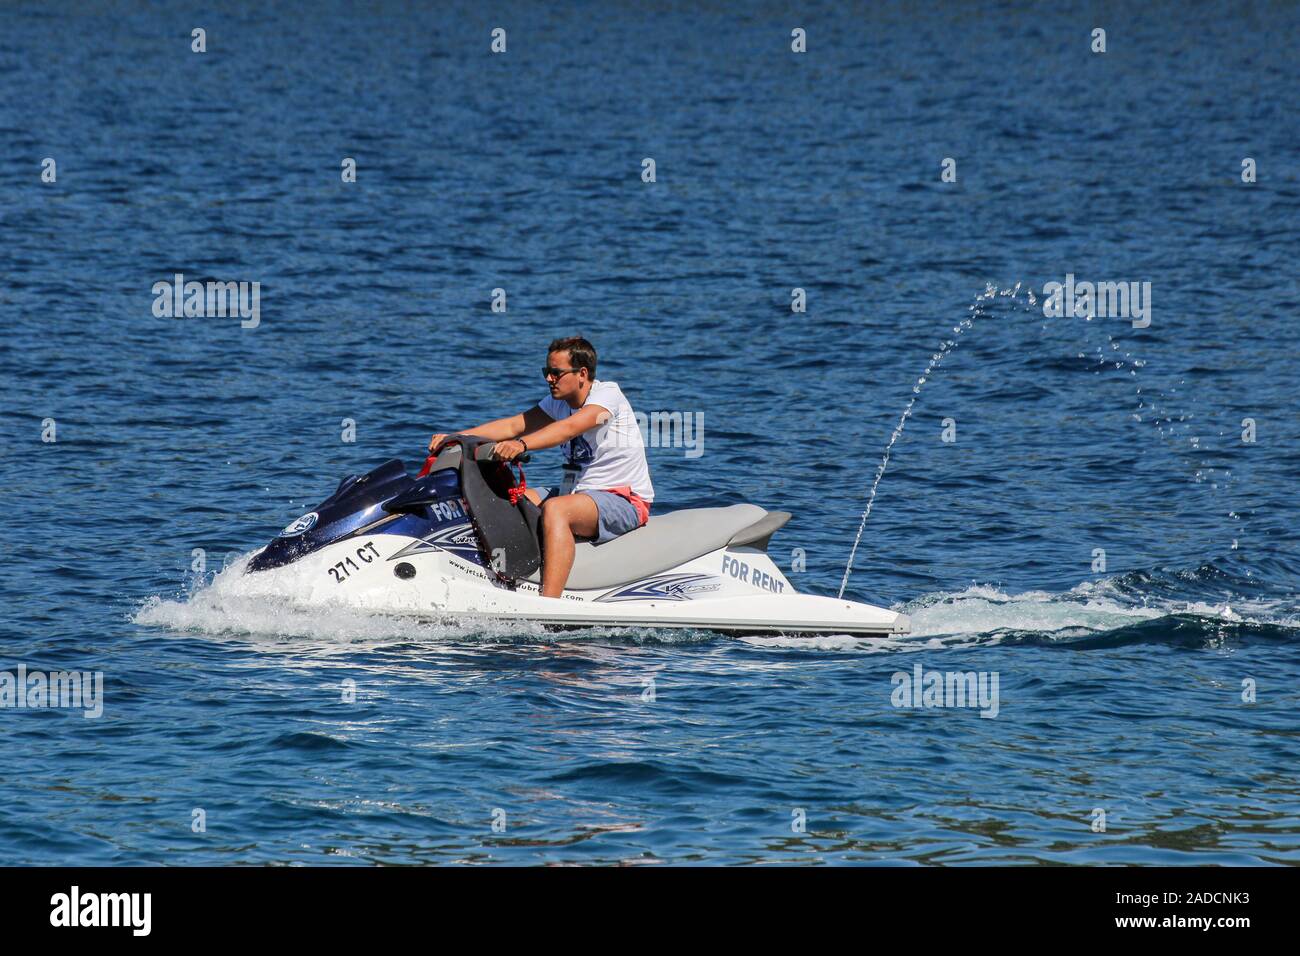 Man with a jet ski or water scooter or personal watercraft Stock Photo